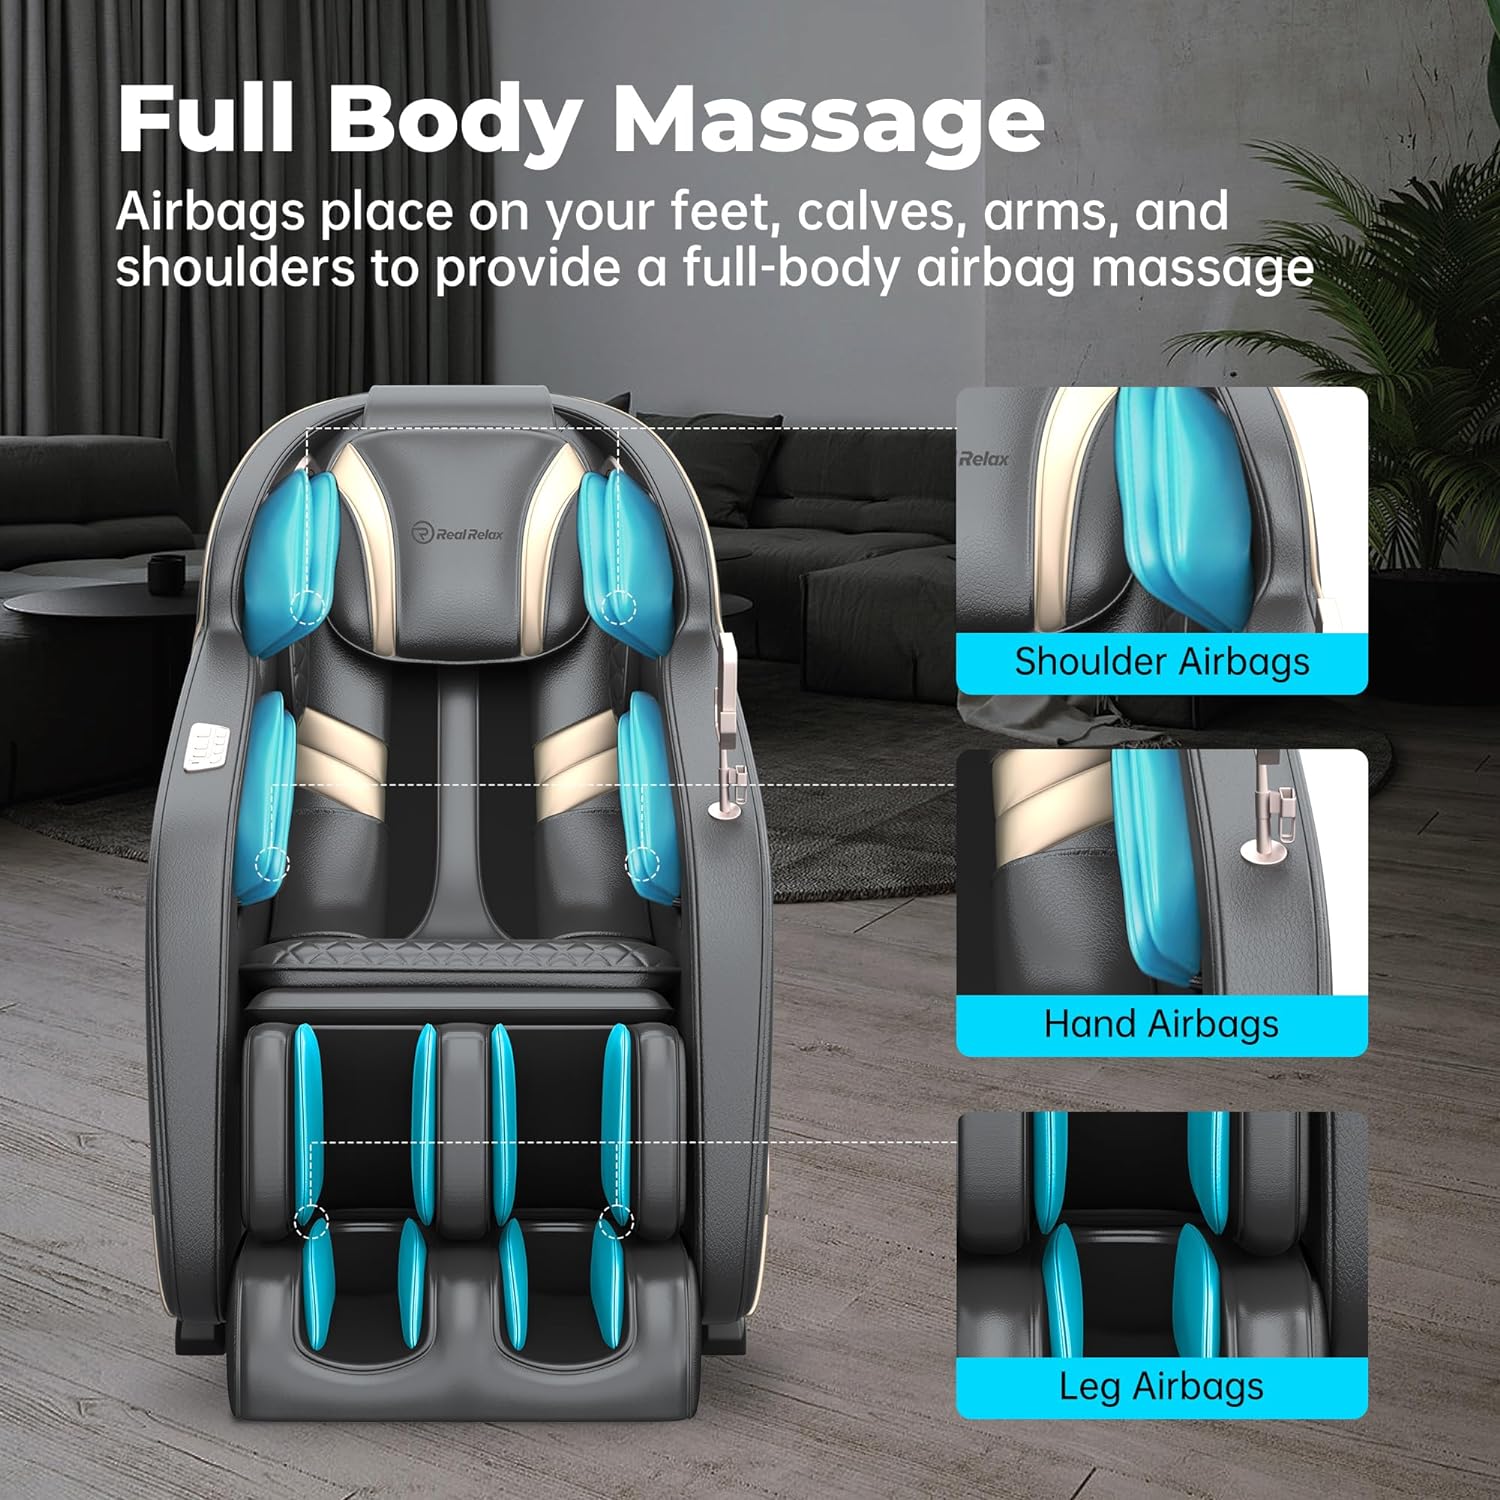 Real Relax PS6000 - Full Body Airbag Massage